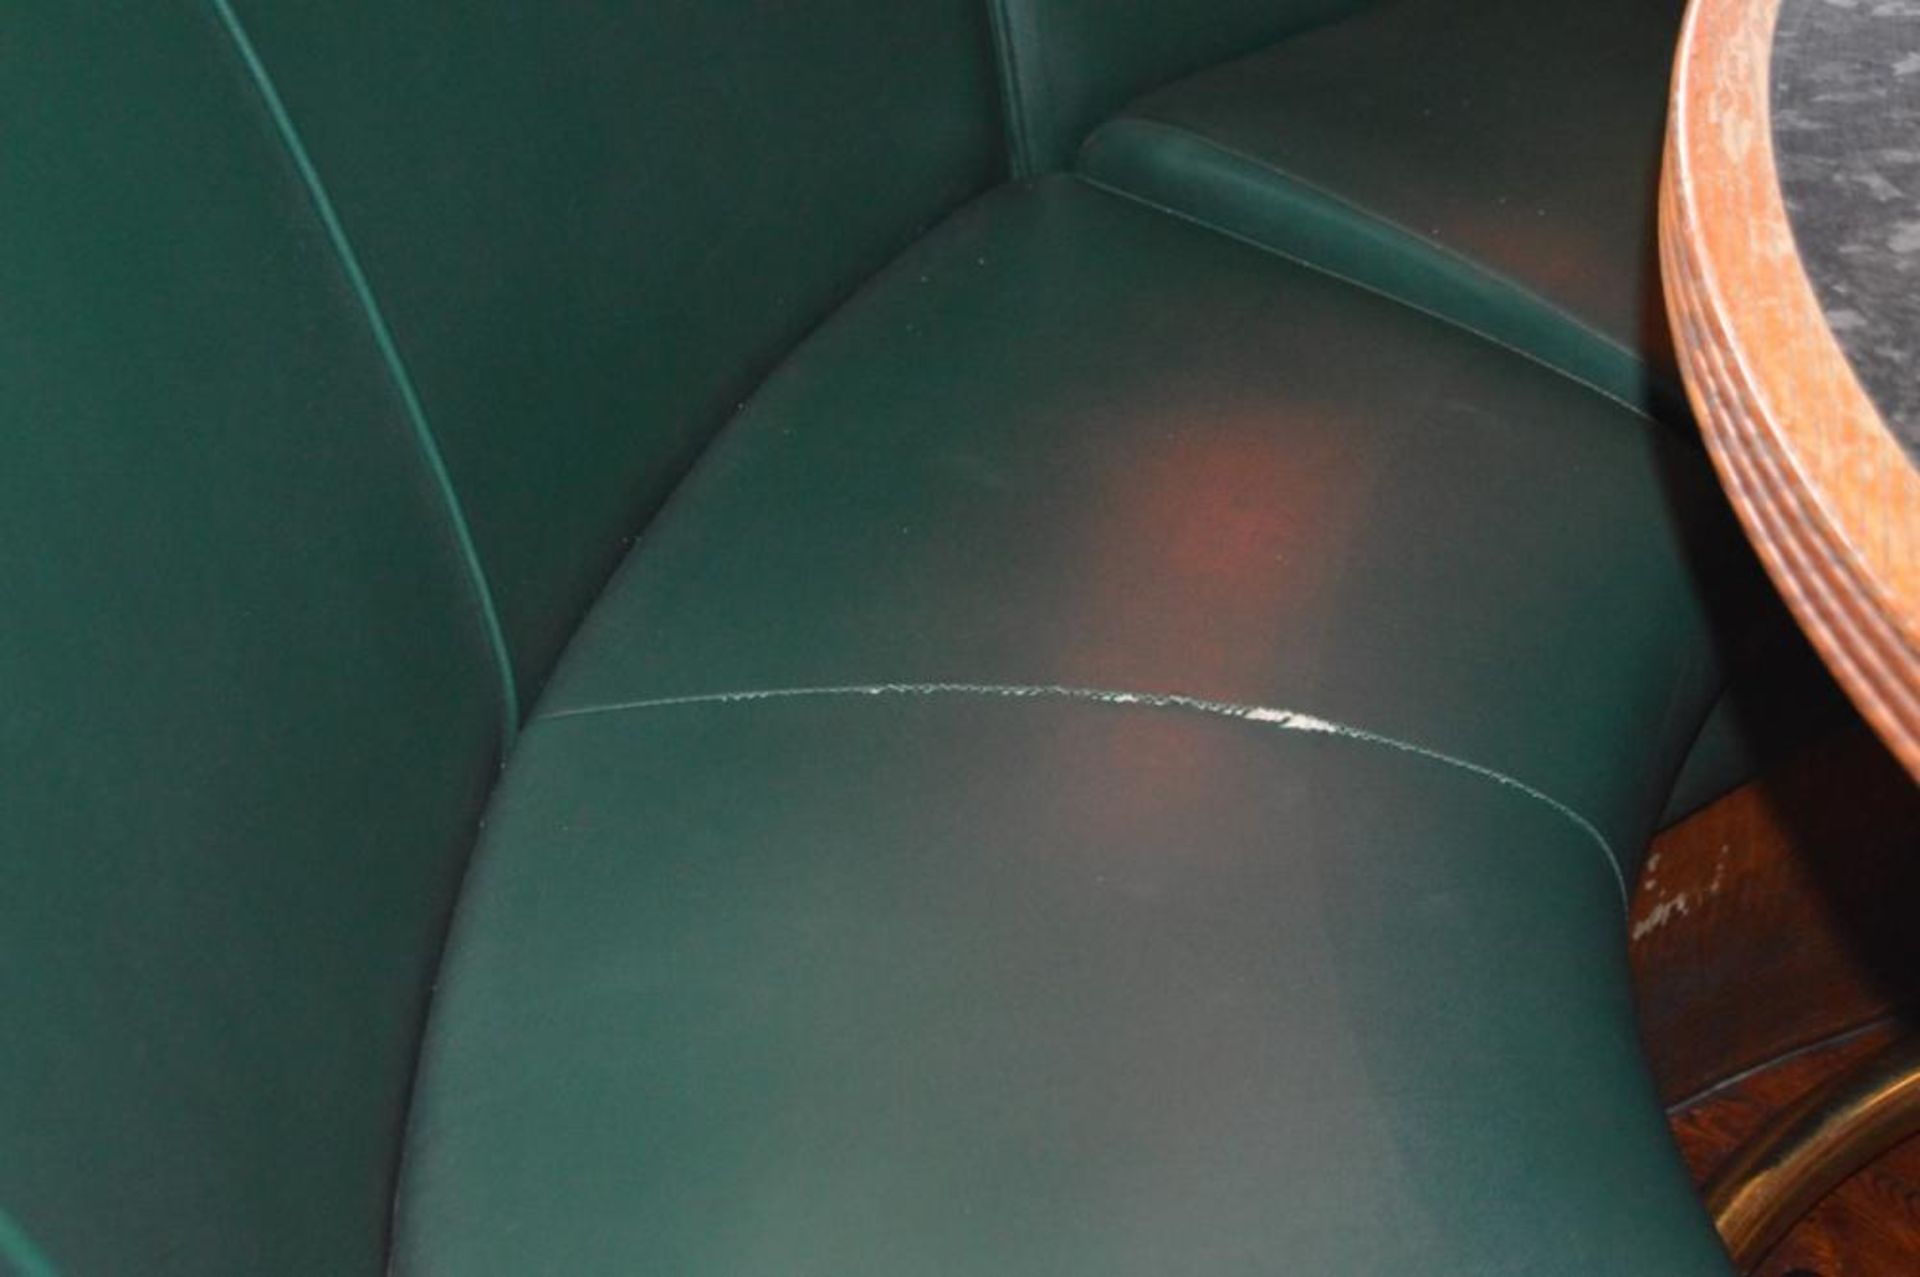 2 x Contemporary U Seating Booths With Green Faux Leather Upholstery and Brass Foot Rests - H105 x W - Image 4 of 6